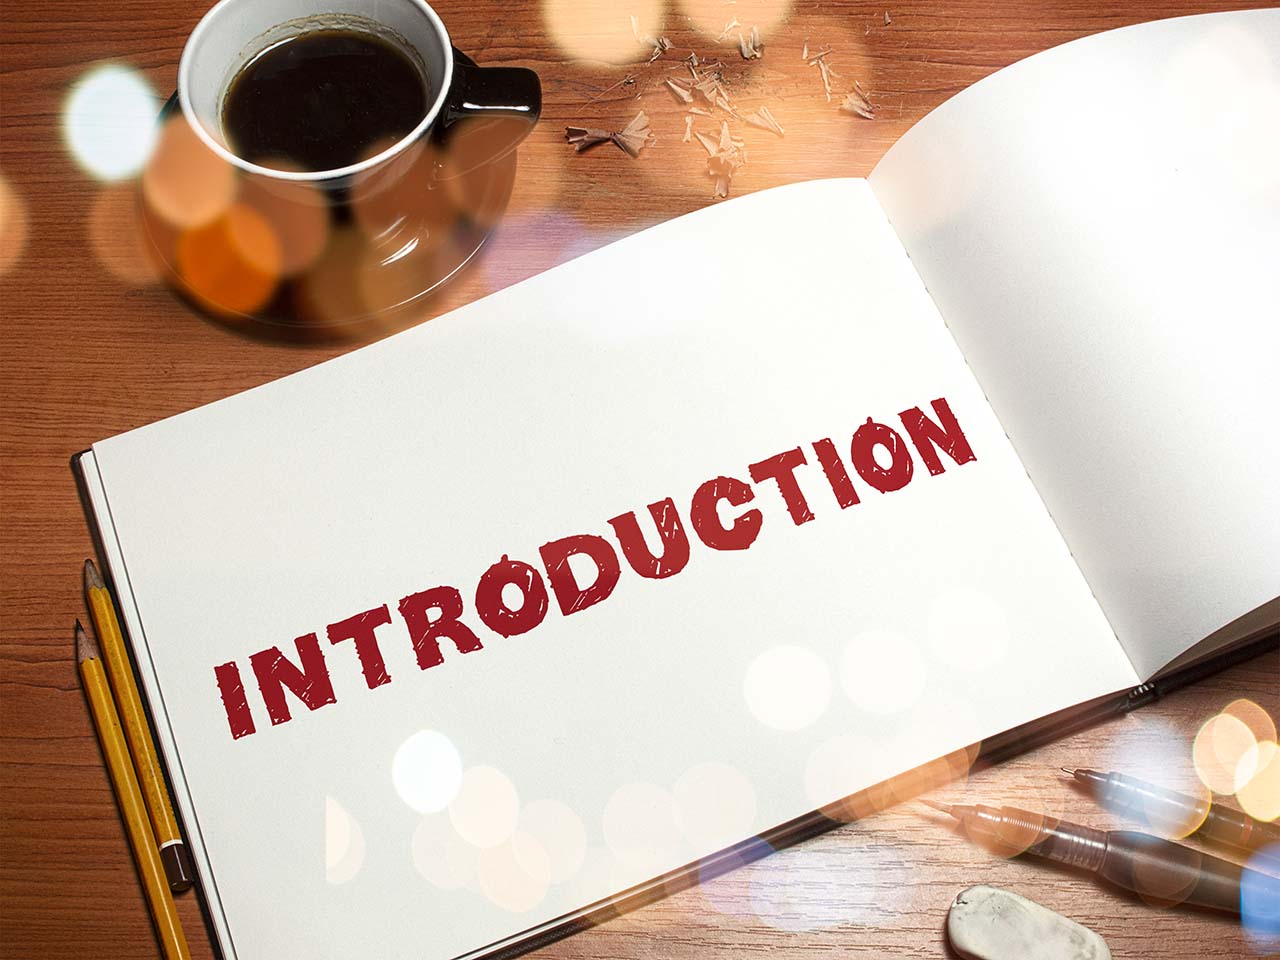 what is introduction in thesis